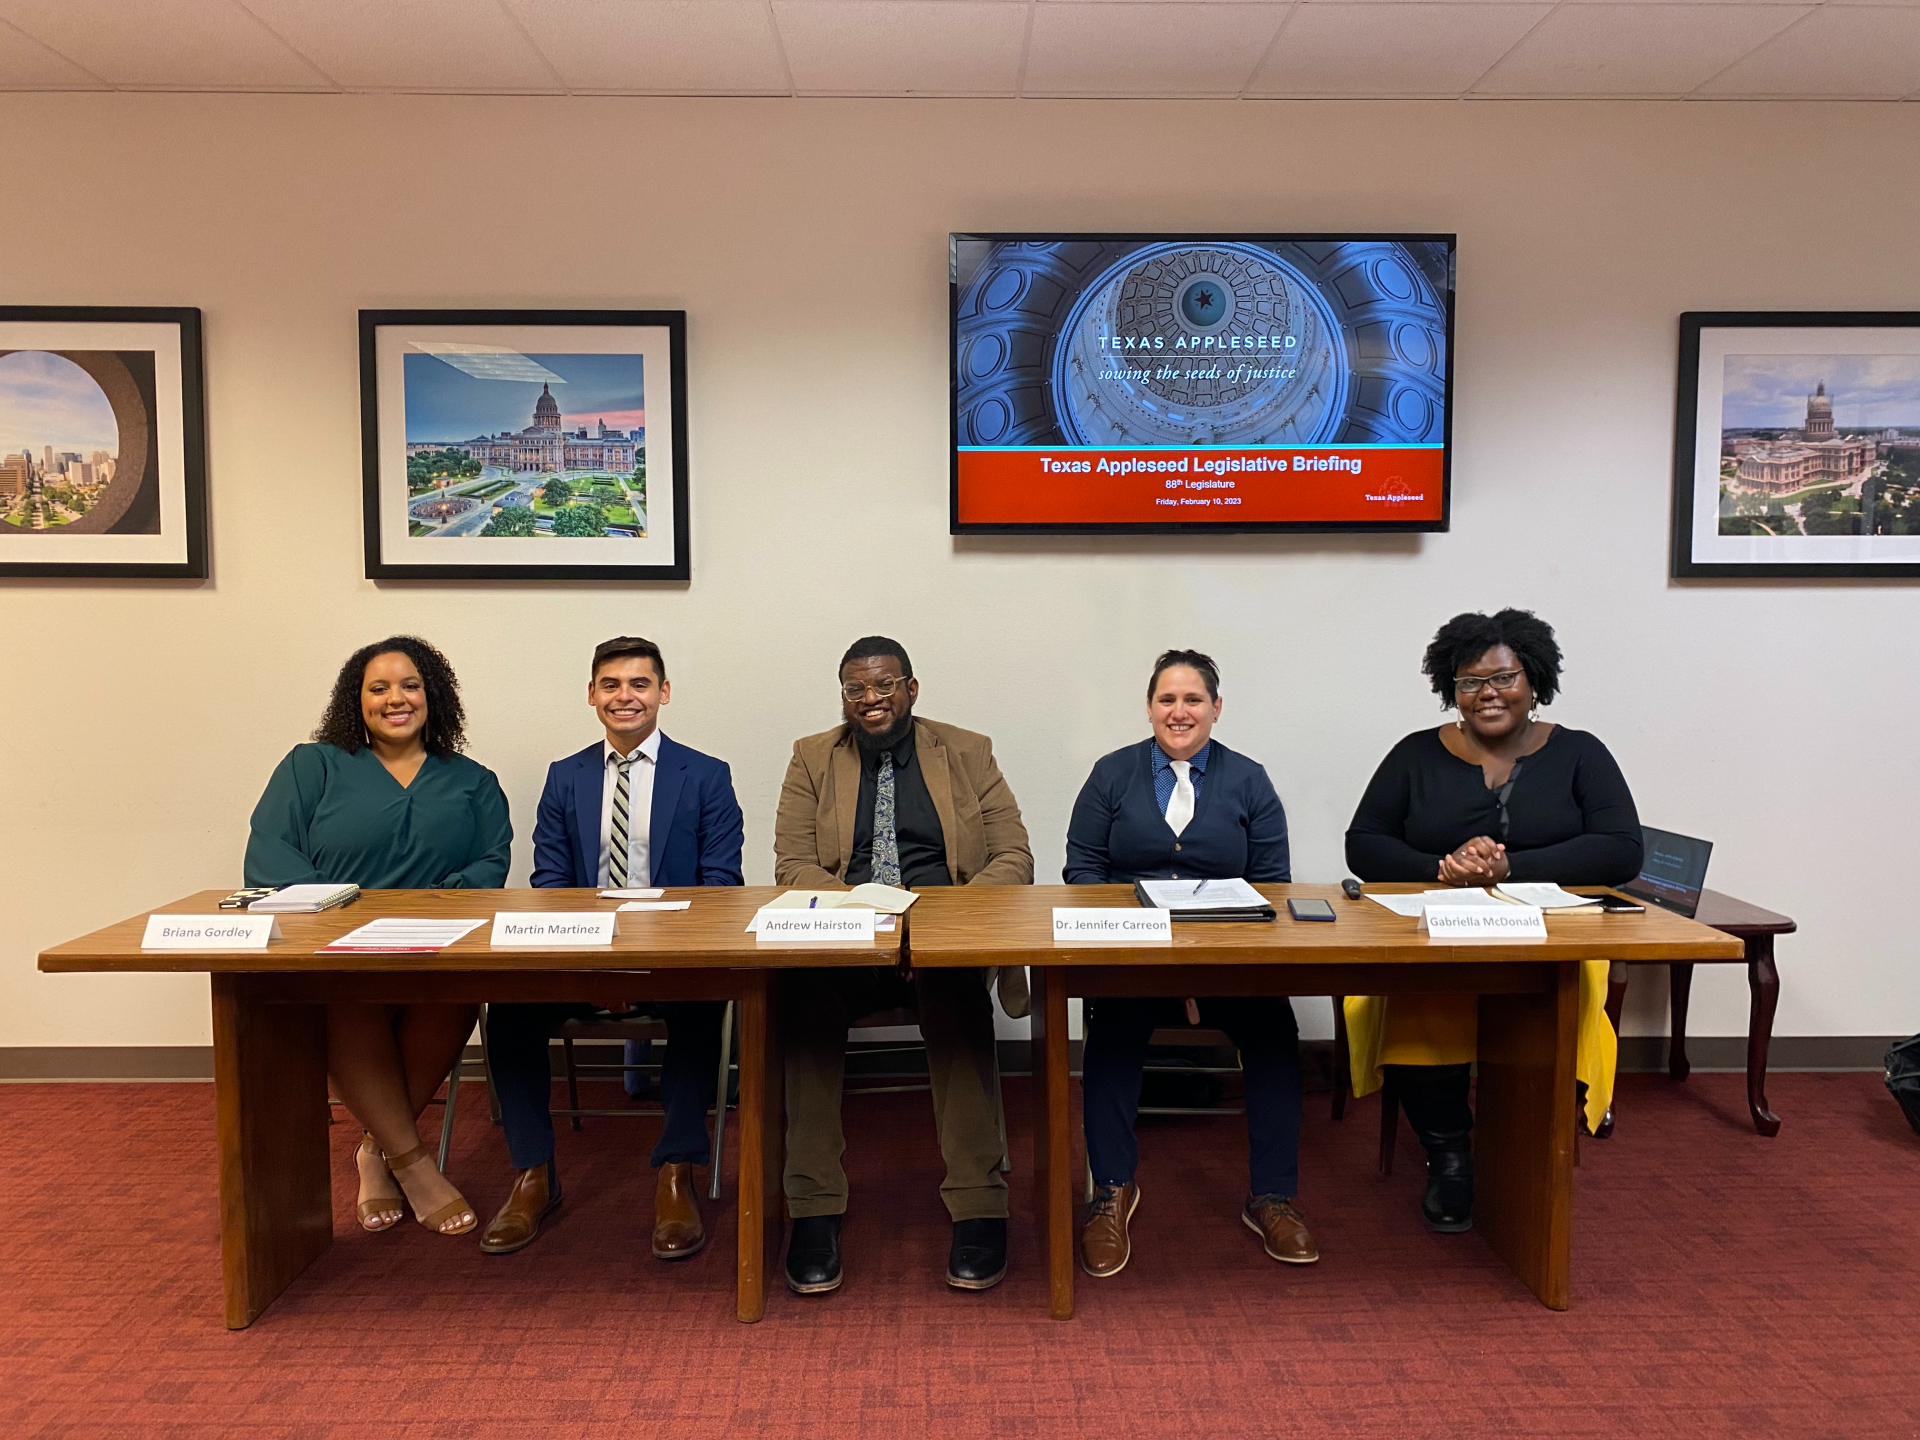 Texas Appleseed staff members, in 2022 at the Texas Capitol, our legislative briefing, left to right: Briana Gordley, Martin Martinez, Andrew Hairston, Jennifer Carreon, Gabriella McDonald